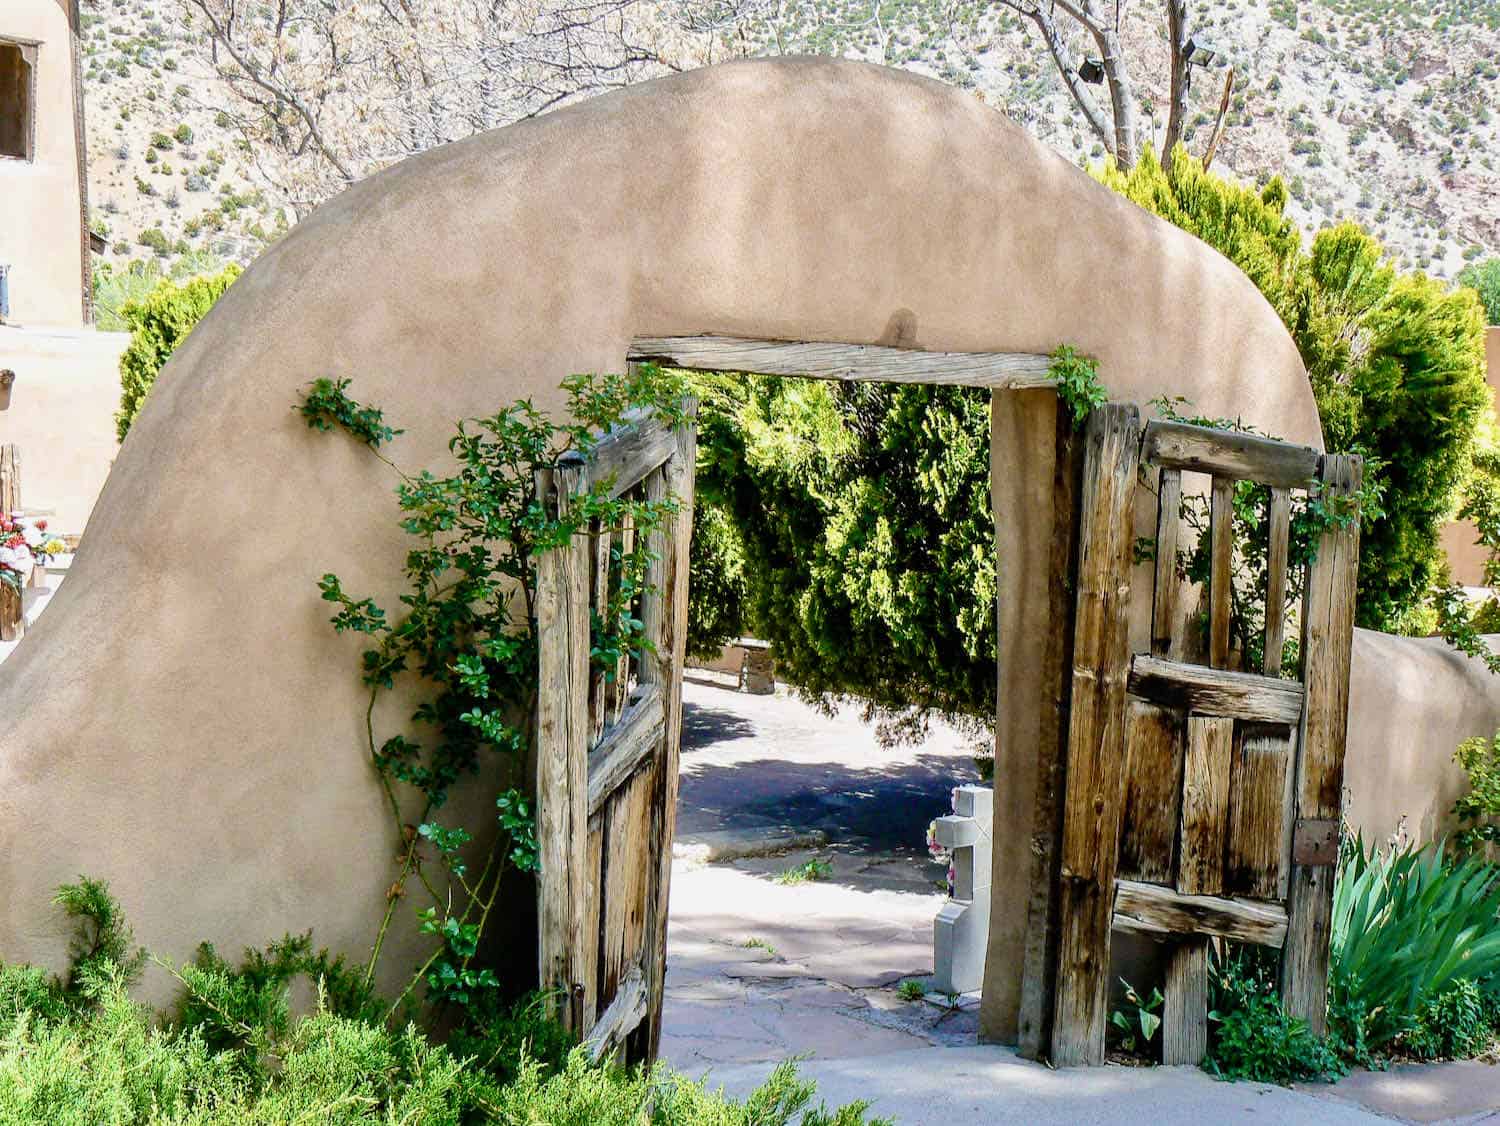 Wooden gates in an adobe arched entry way surrounded by greenery.